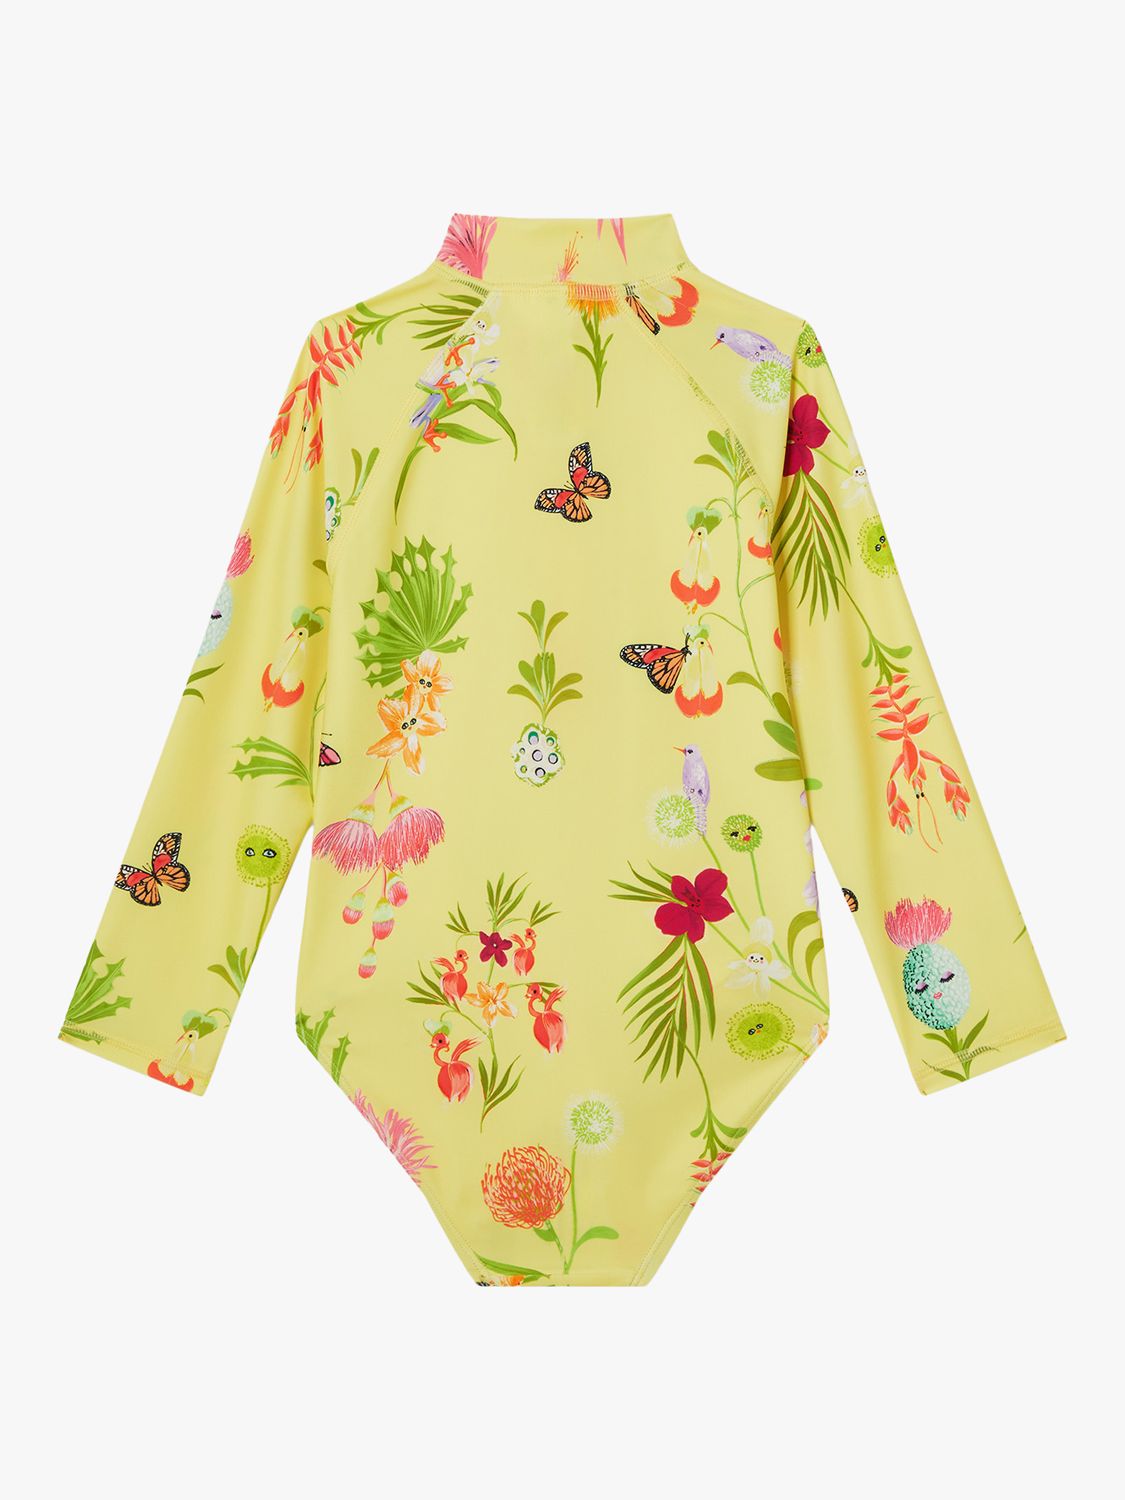 Angels by Accessorize Kids' Floral Print Long Sleeve Swimsuit, Yellow/Multi, 18-24M